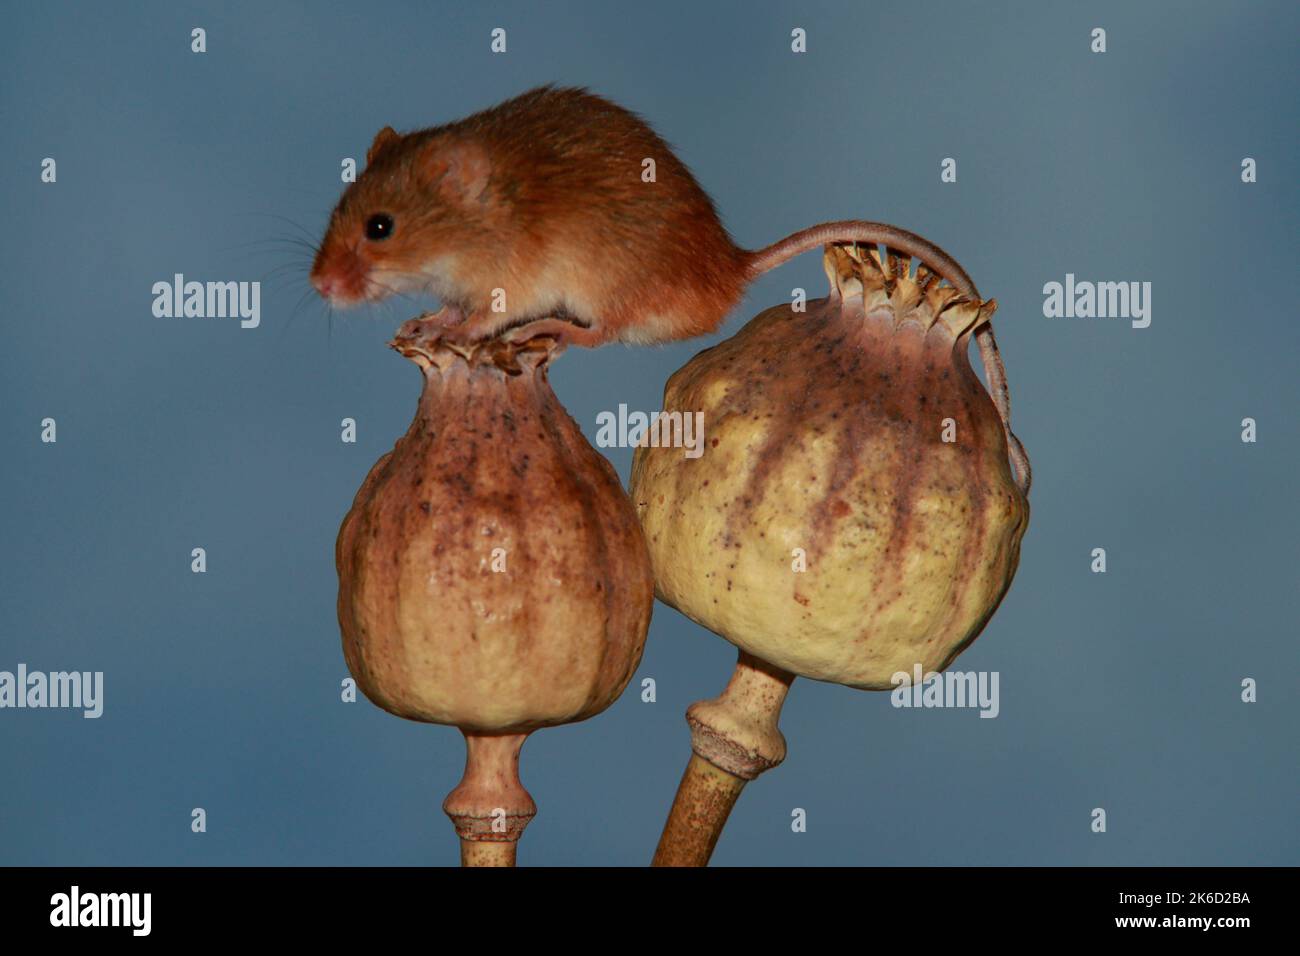 Harvest mouse on dried plant Stock Photo